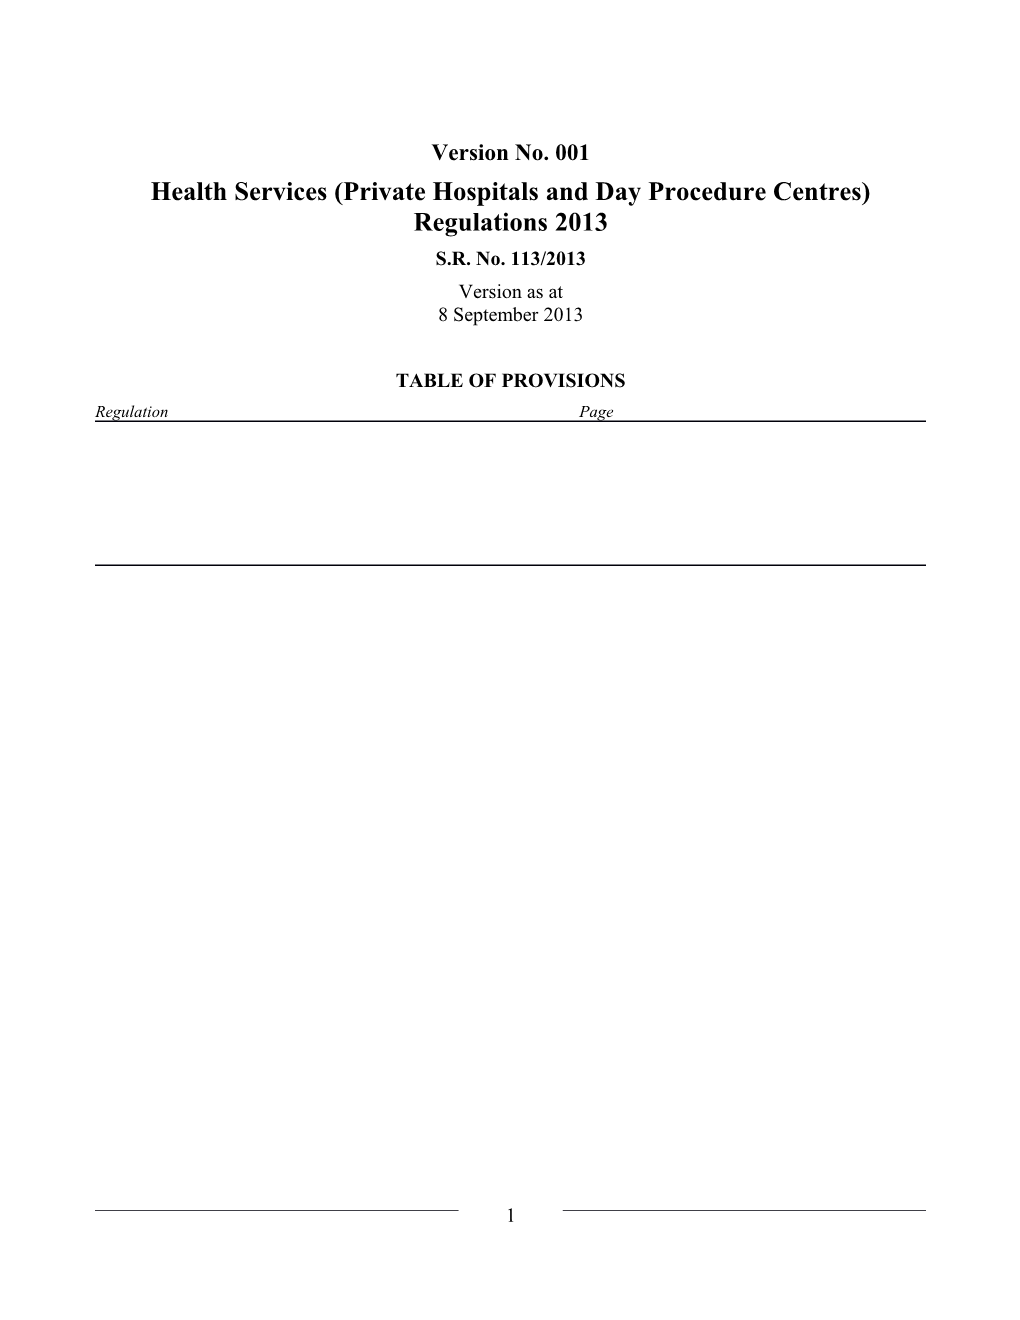 Health Services (Private Hospitals and Day Procedure Centres) Regulations 2013